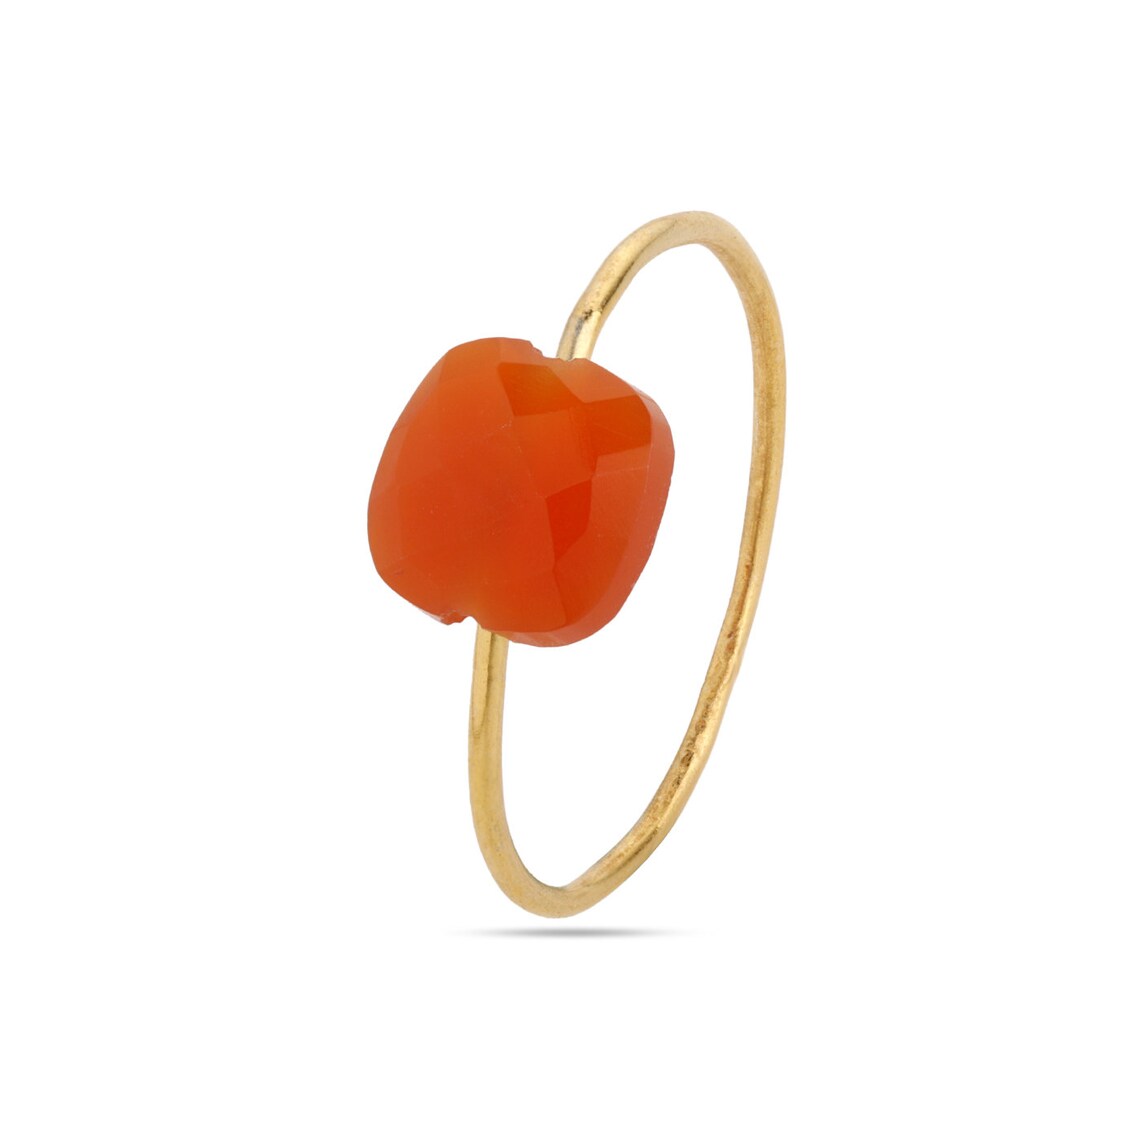 Natural Carnelian Ring, Sterling Silver Ring, Gold Ring, Cushion Shape Ring, Handmade Ring, Stacking Ring, August Birthstone Ring